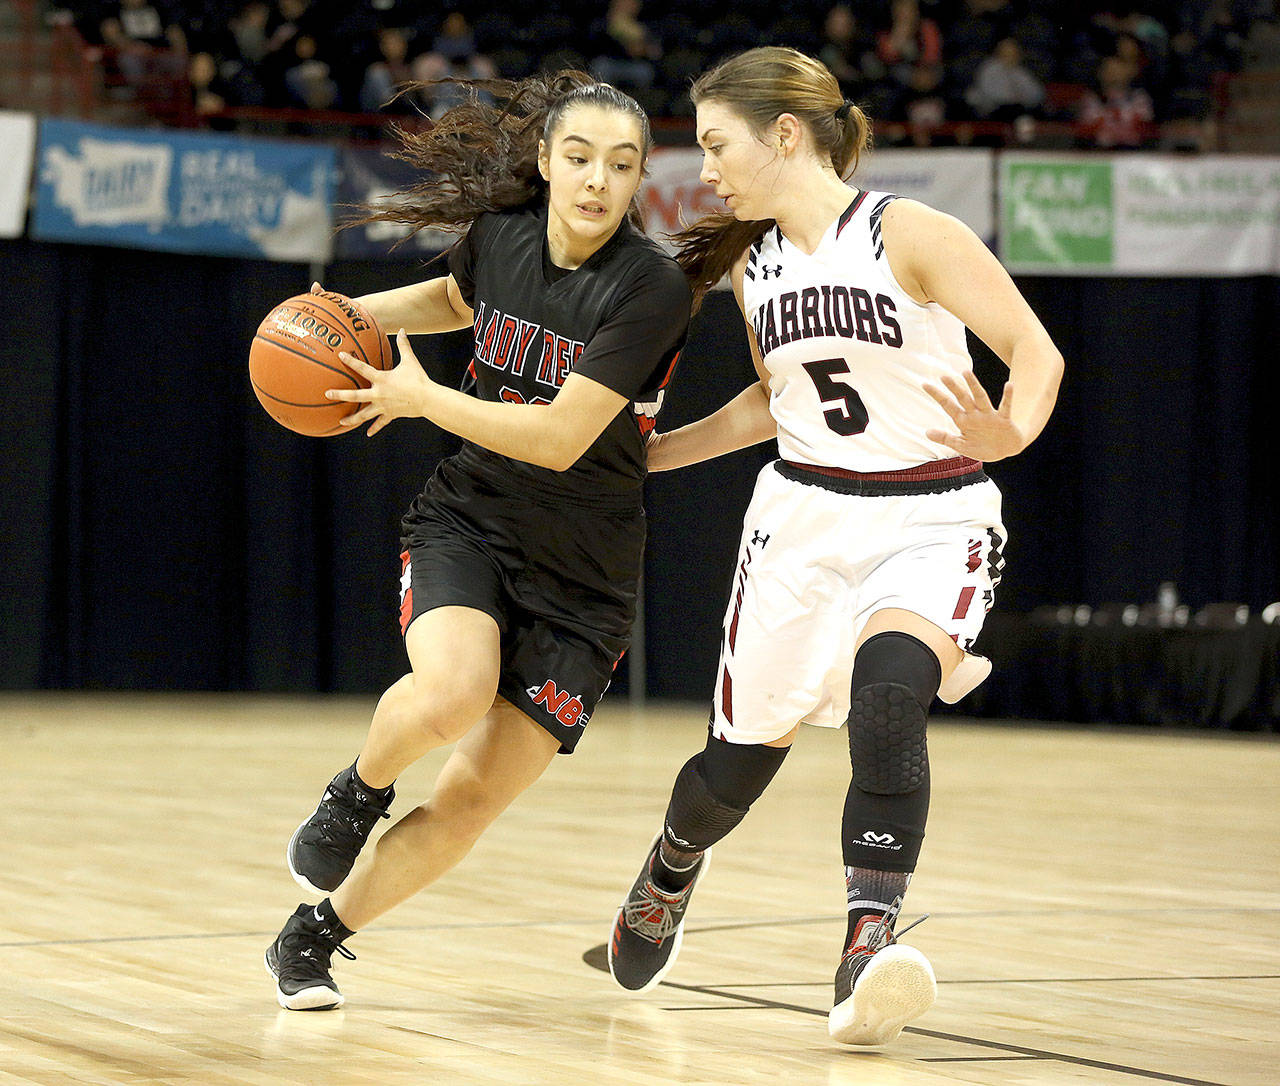 Cei’J Gagnon drives the ball against ACH’s Sarah Bradshaw in the girls’ 1B third-place game Saturday in Spokane. Gagnon scored 12 points as the Red Devils won 67-56 to finish third, the highest girls’ finish ever at state. (Chris Johnson/for Peninsula Daily News)